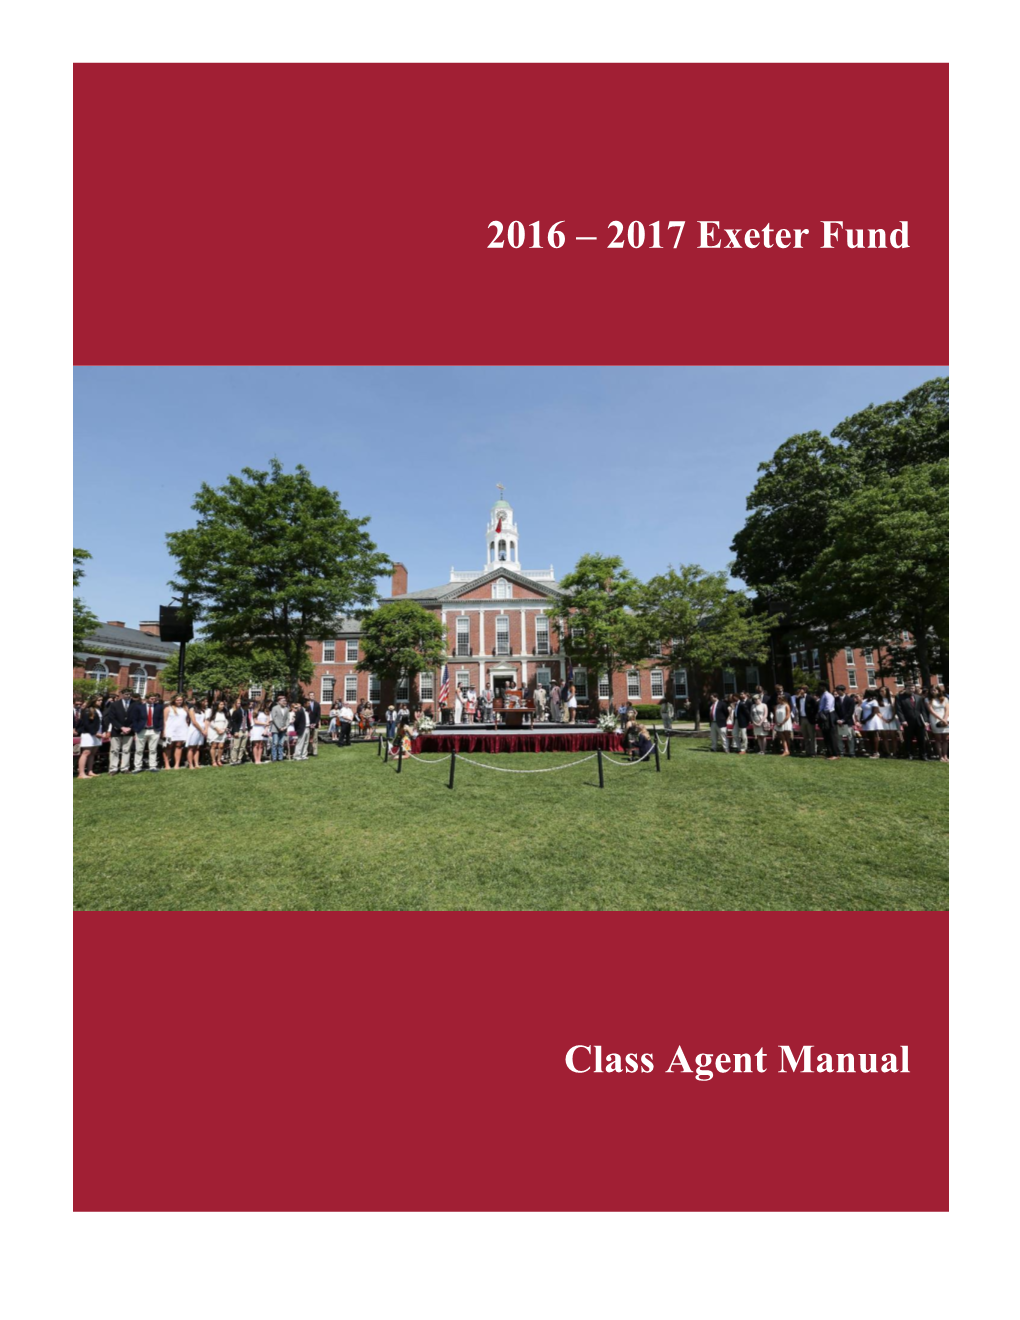 2016 – 2017 Exeter Fund Class Agent Manual